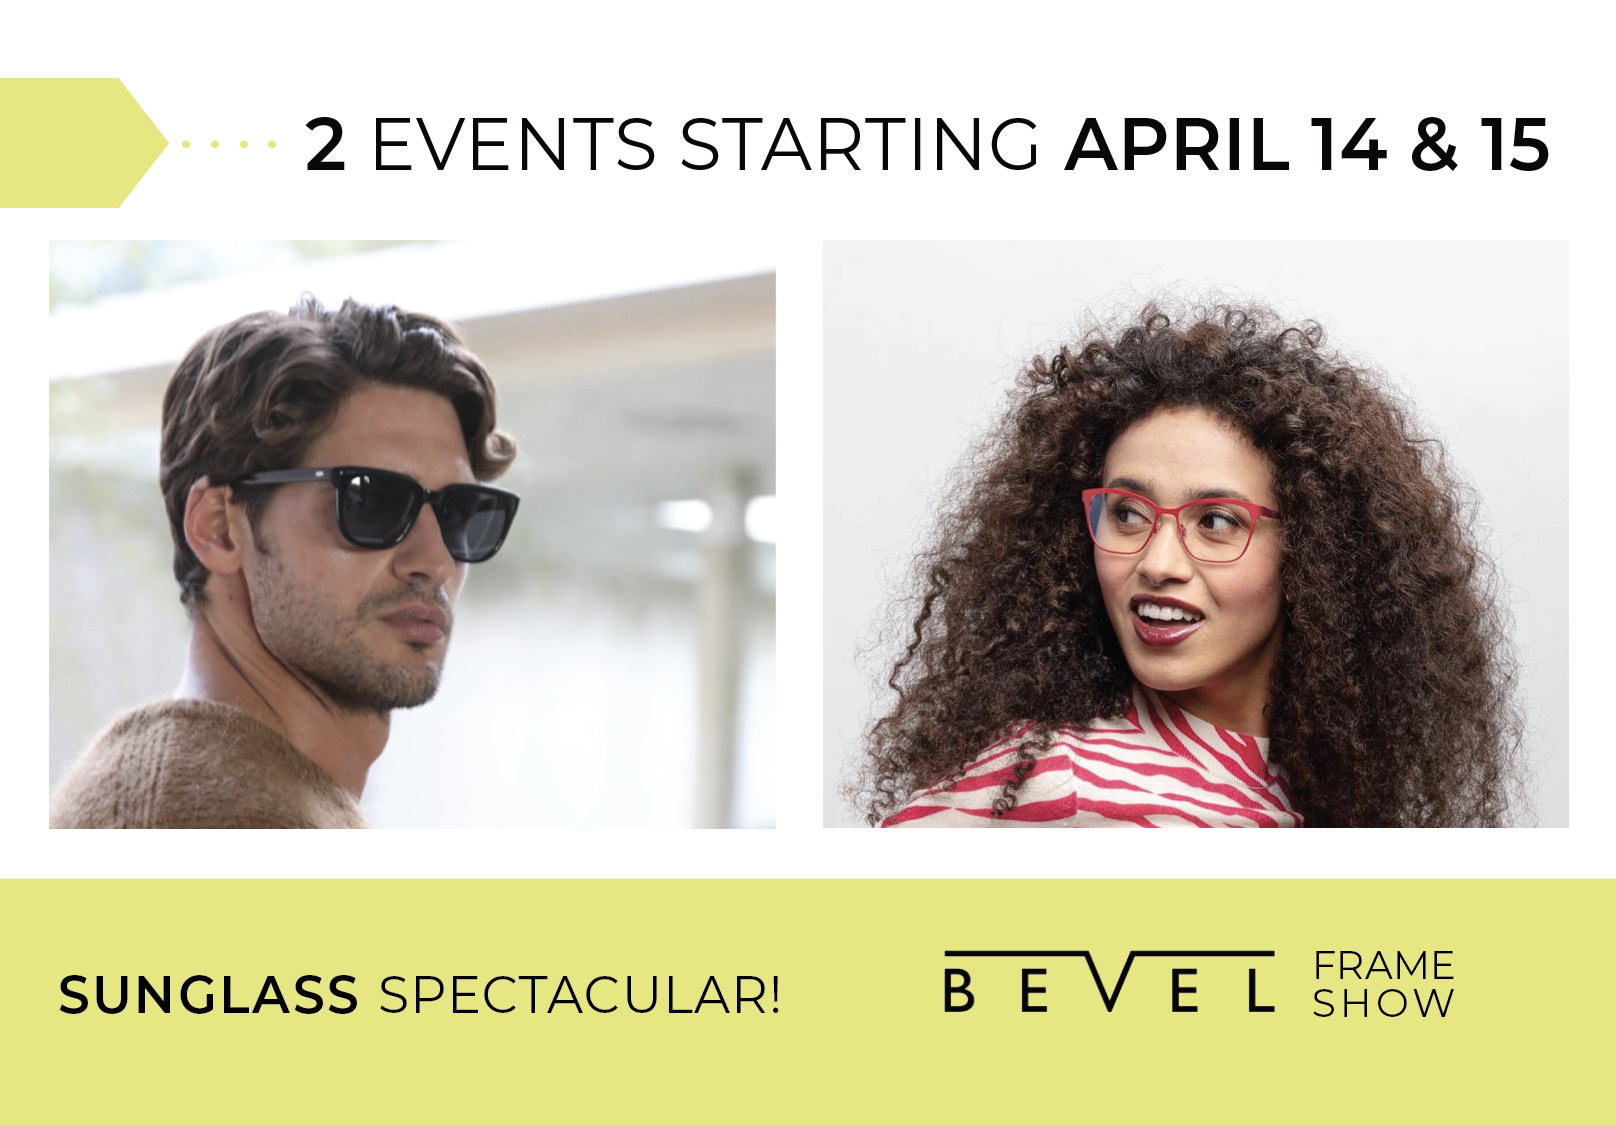 Sunglass Spectacular and Bevel Frame Show on April 15th